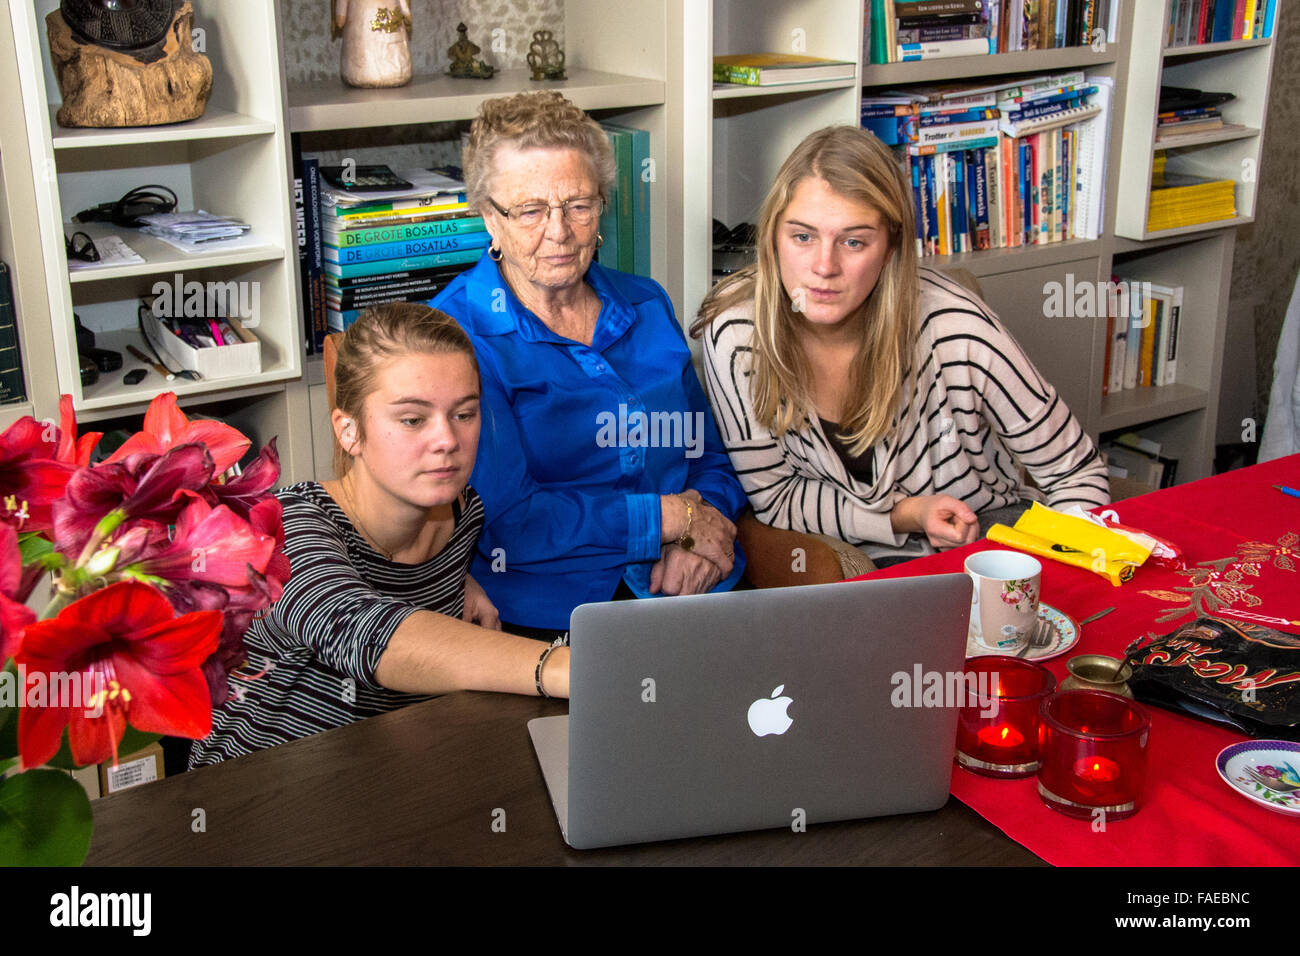 grandmother and grandchild looking at macbook computer Stock Photo